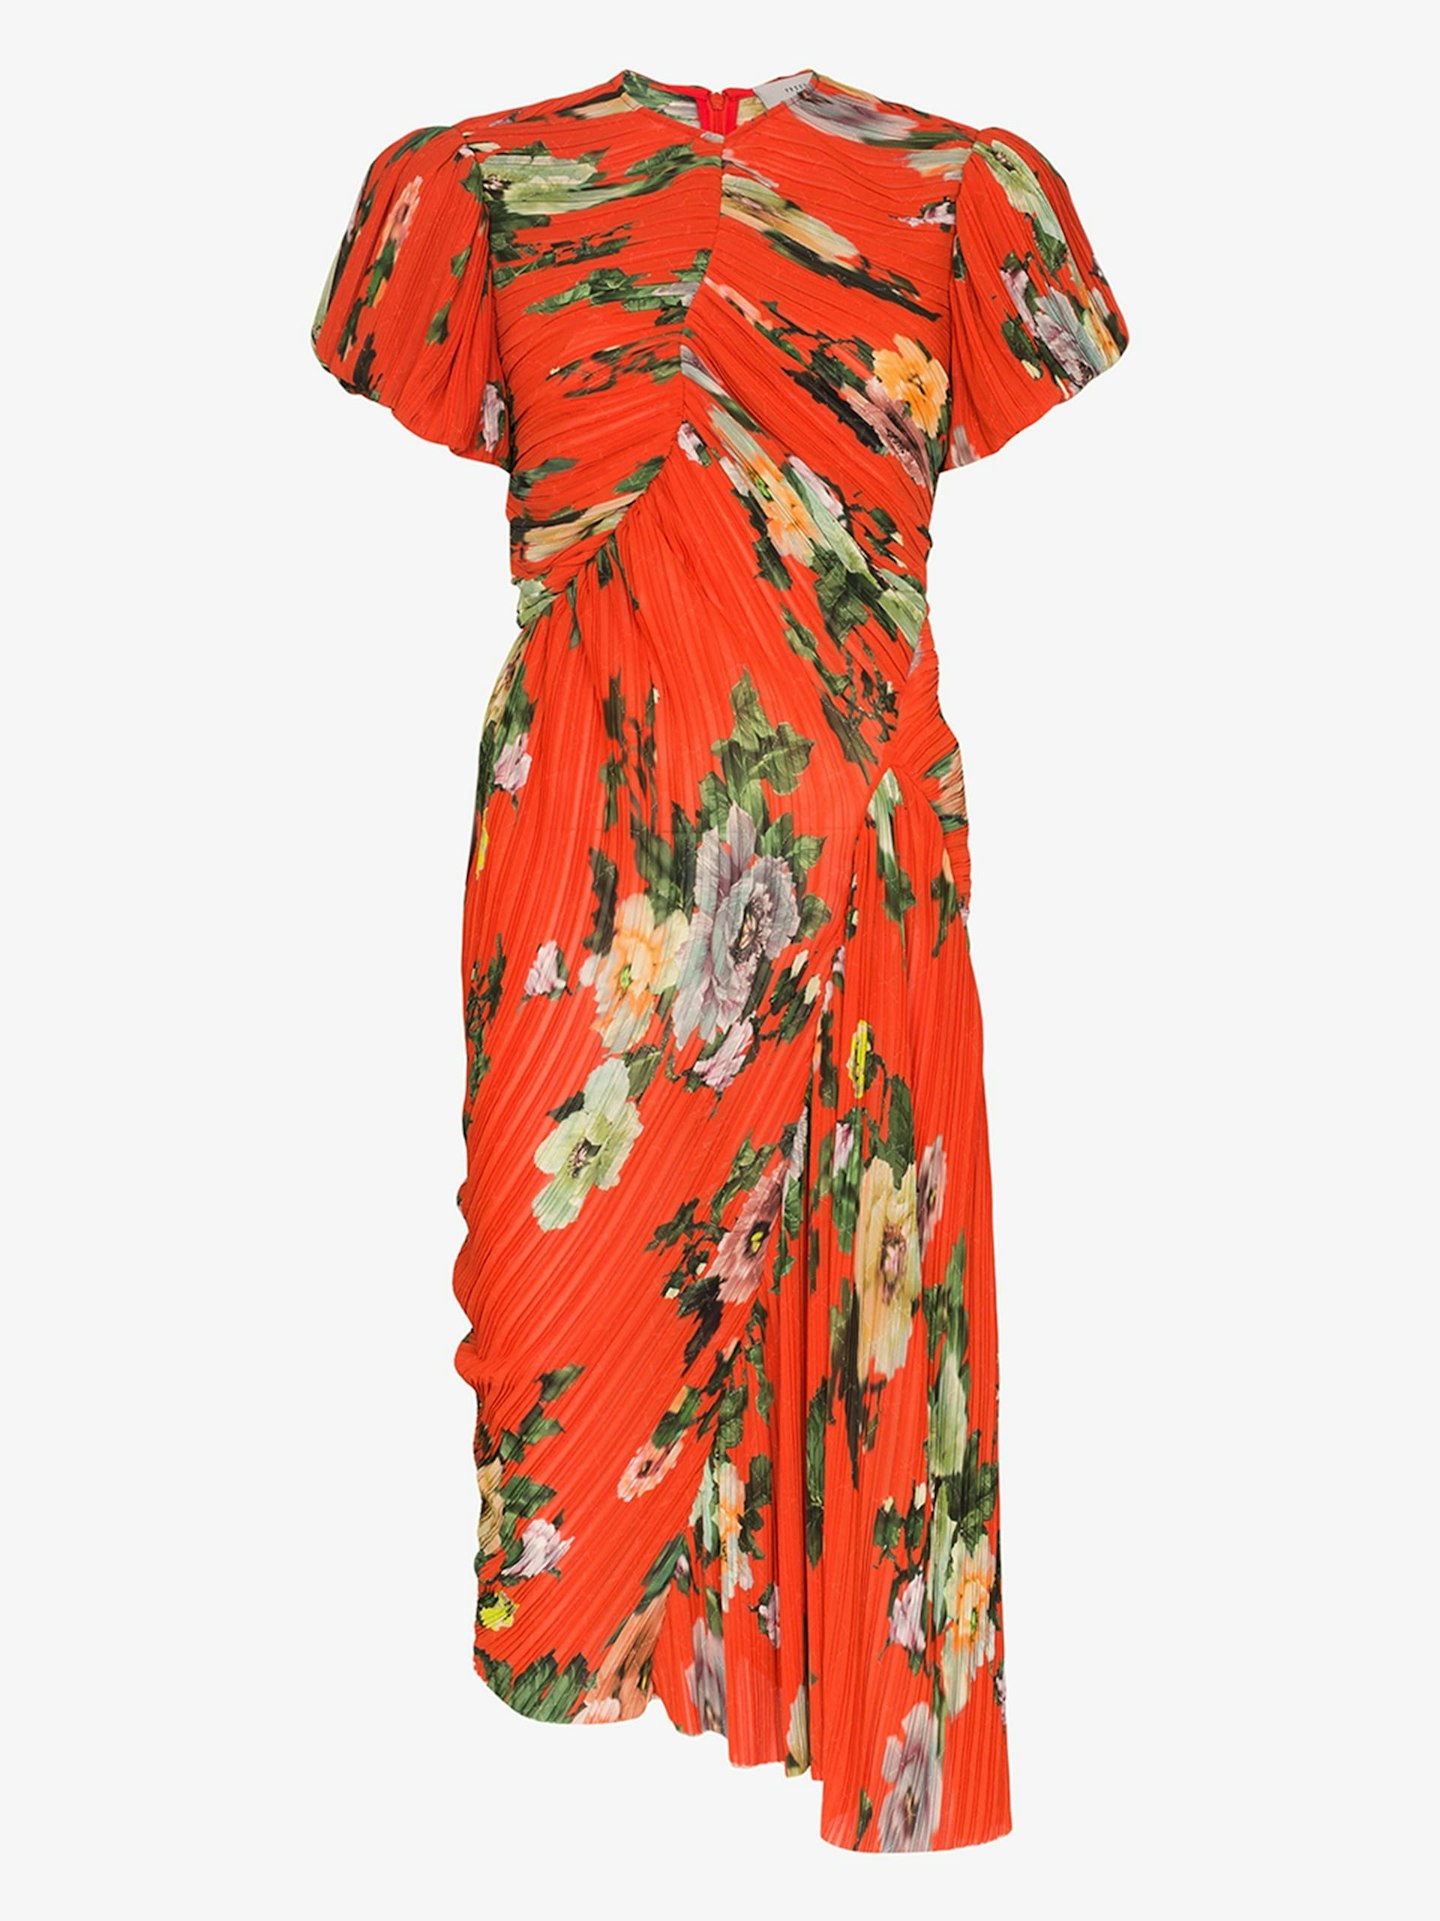 Preen by Thornton Bregazzi, Meggy Pleat Floral Dress, £1,080 at Browns